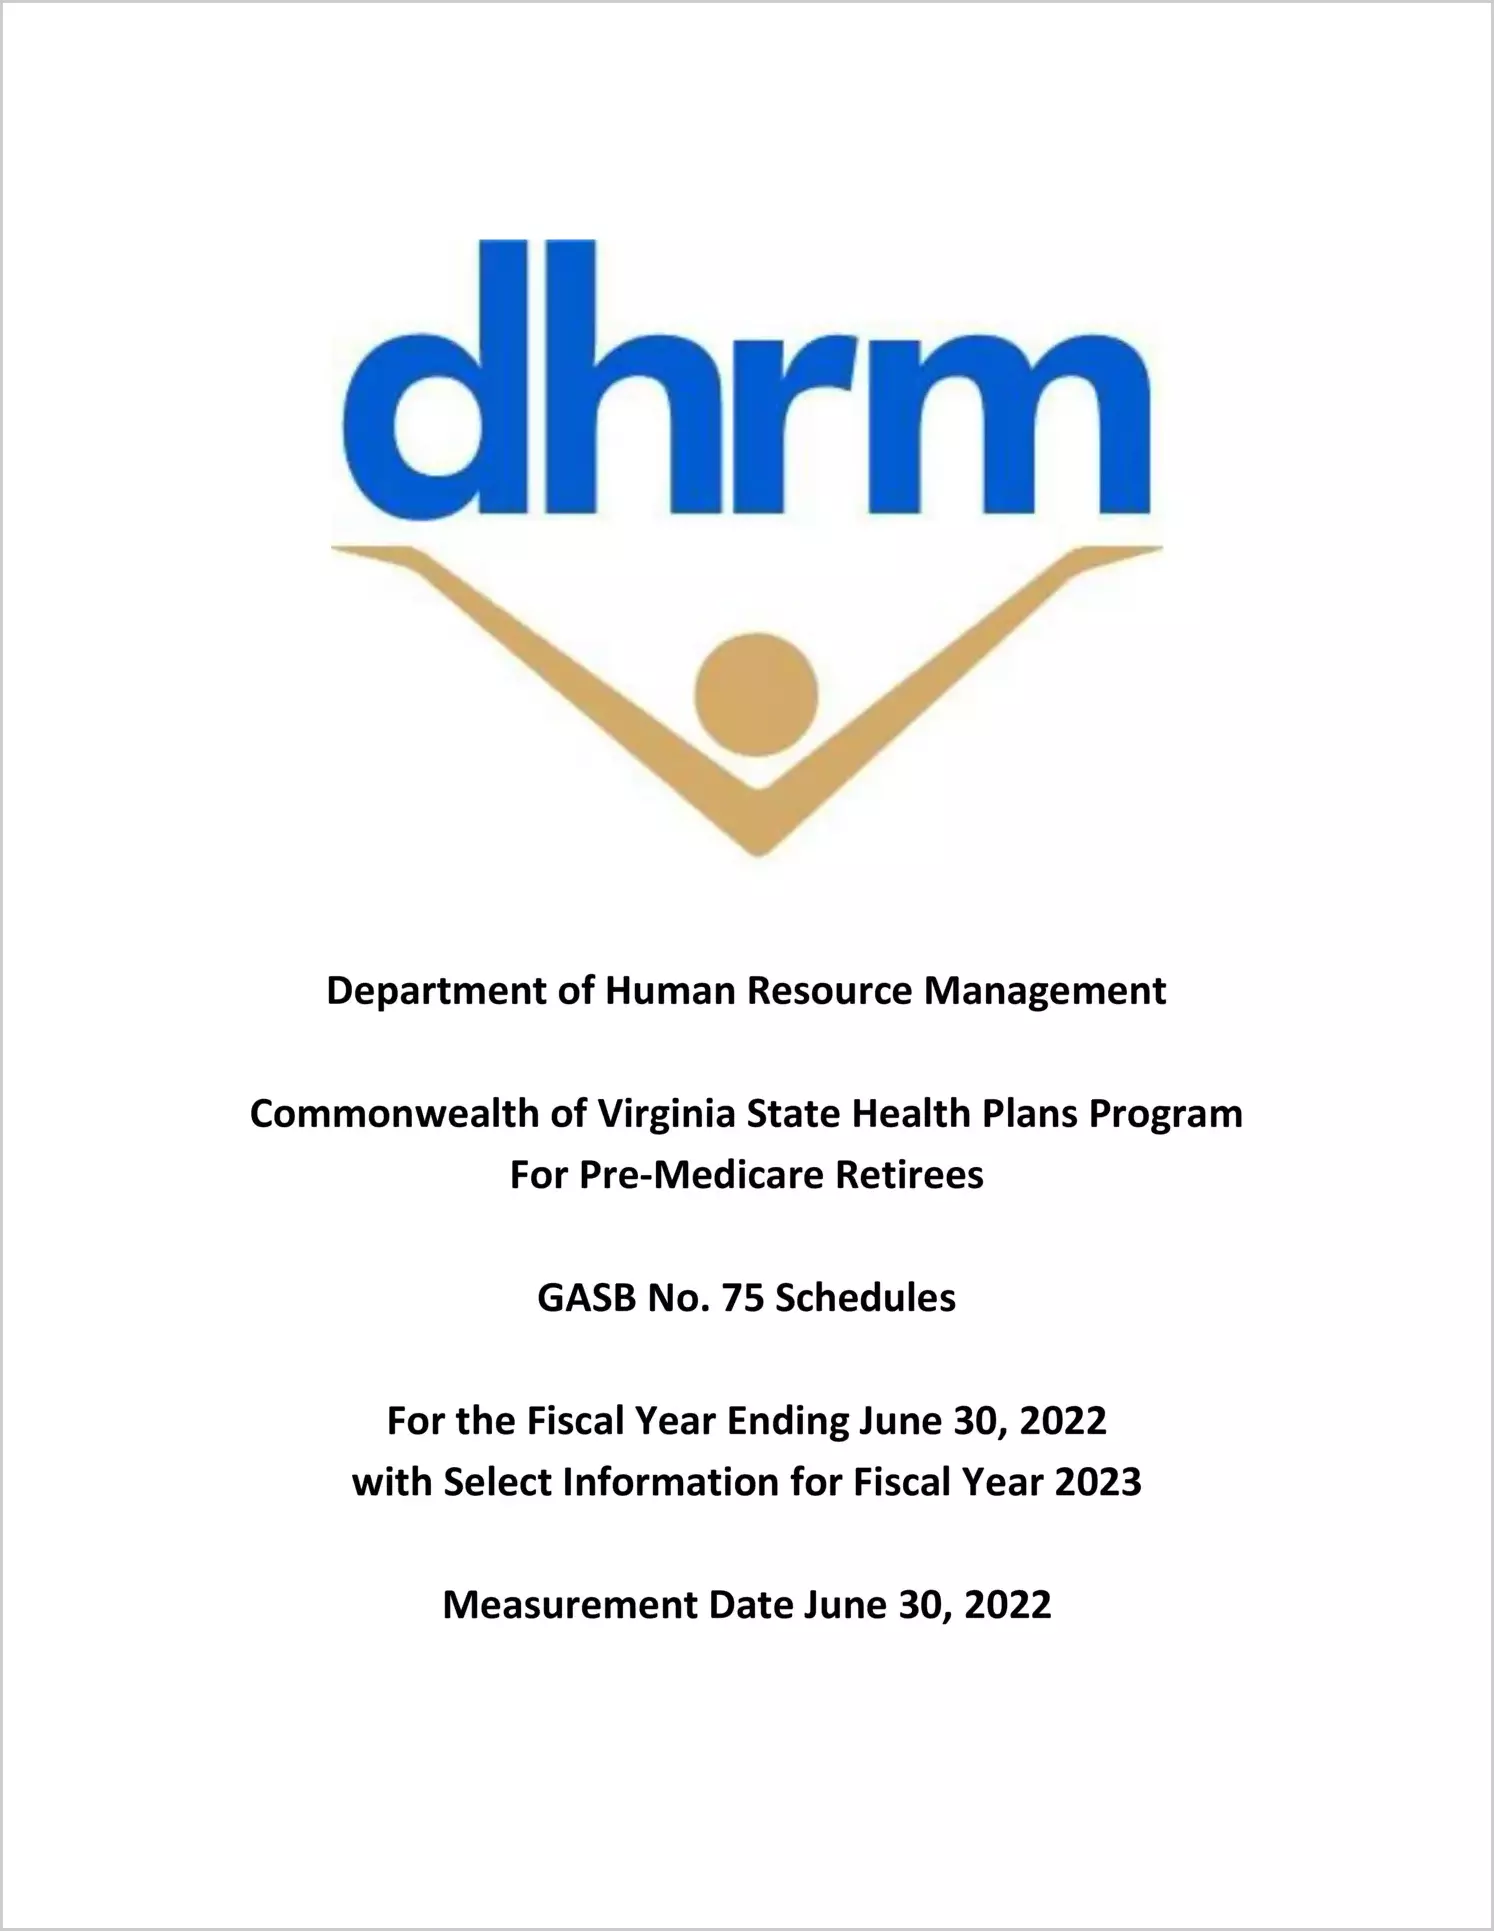 Department of Human Resource Management Commonwealth of Virginia State Health Plans Program for Pre-Medicare Retirees for the fiscal year ended June 30, 2022